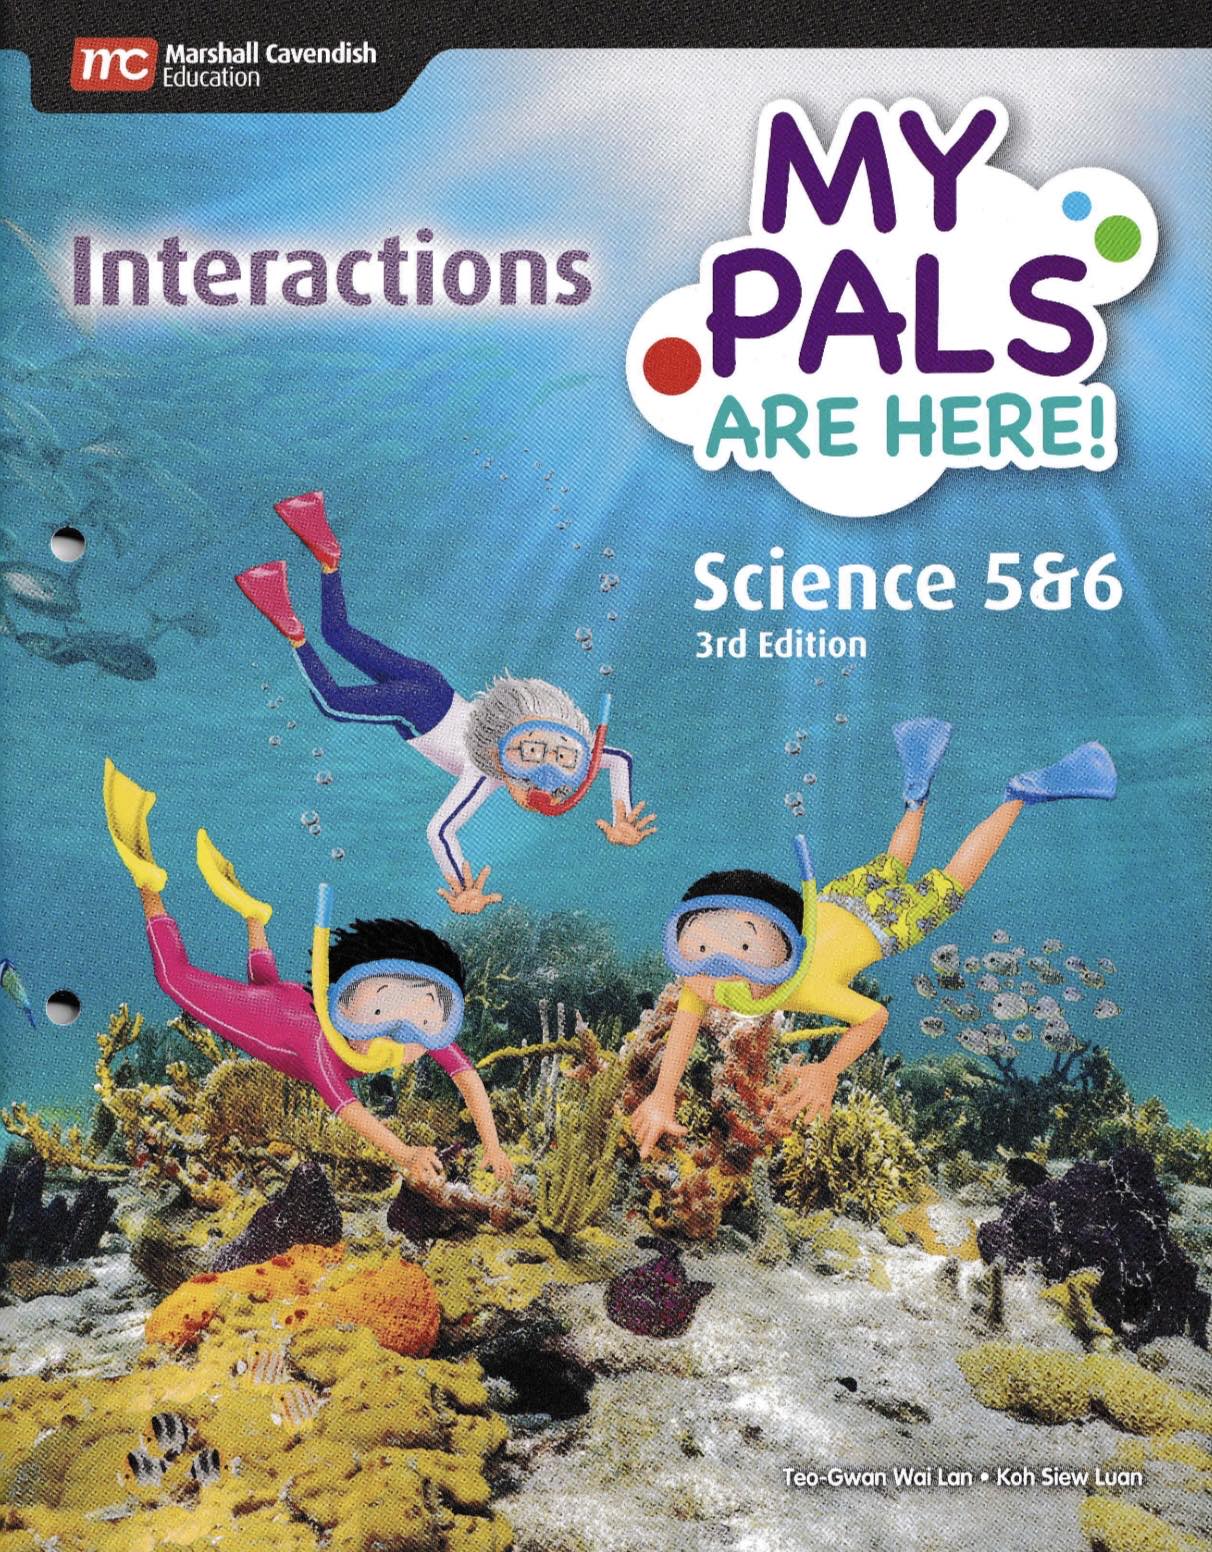 My Pals Are Here! Science Primary 5&6 Textbook (3rd Edition)